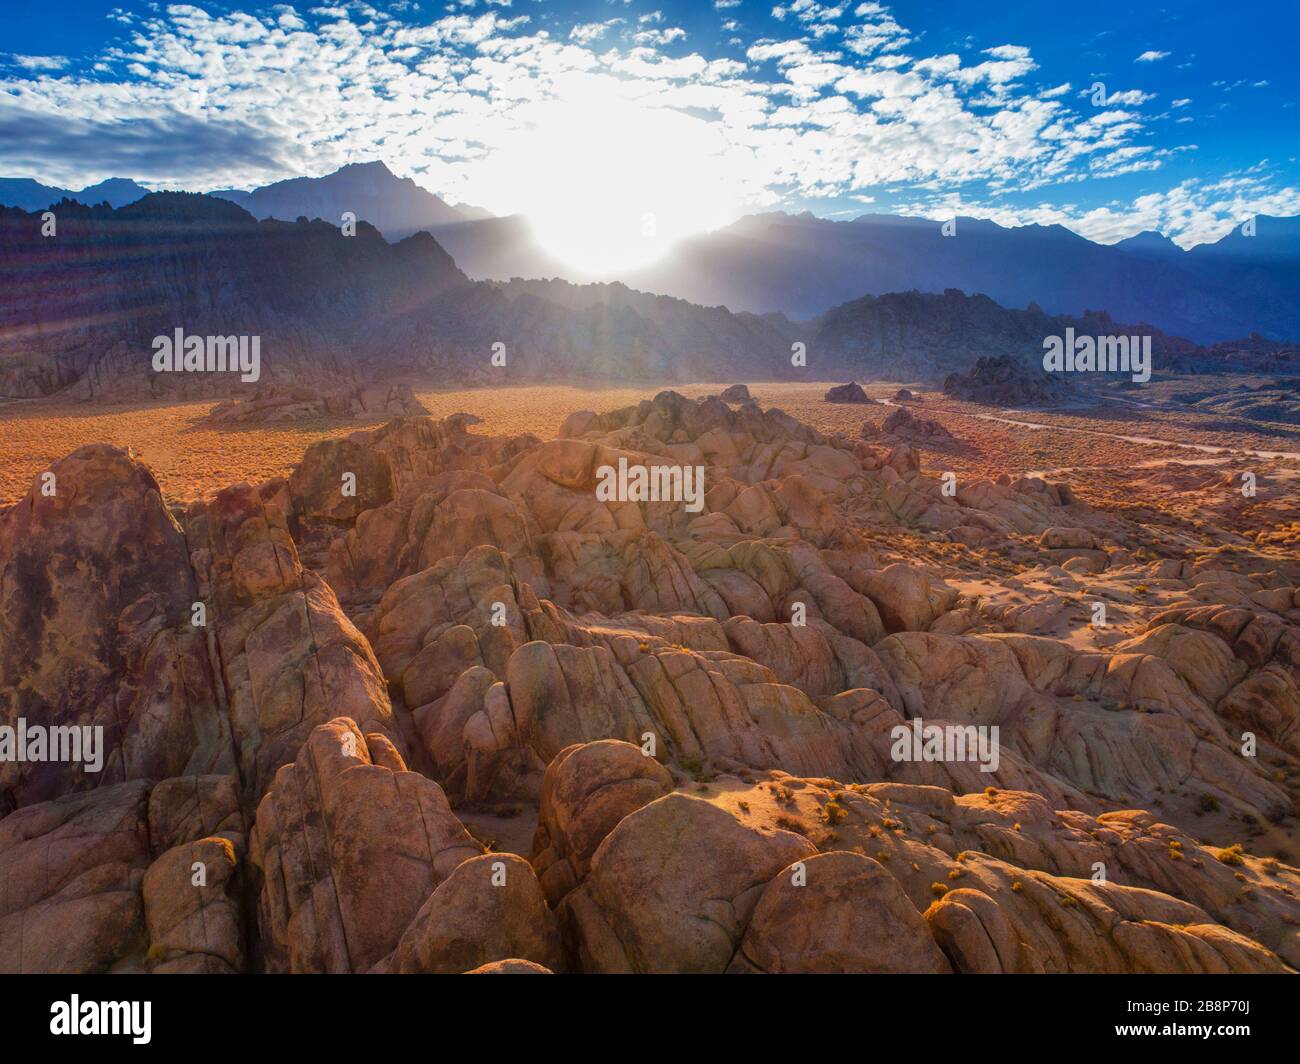 Aerial view of the rock formations of the Alabama Hills with Mt. Whitney and the Sierra Nevada Mountains in the distance. Stock Photo